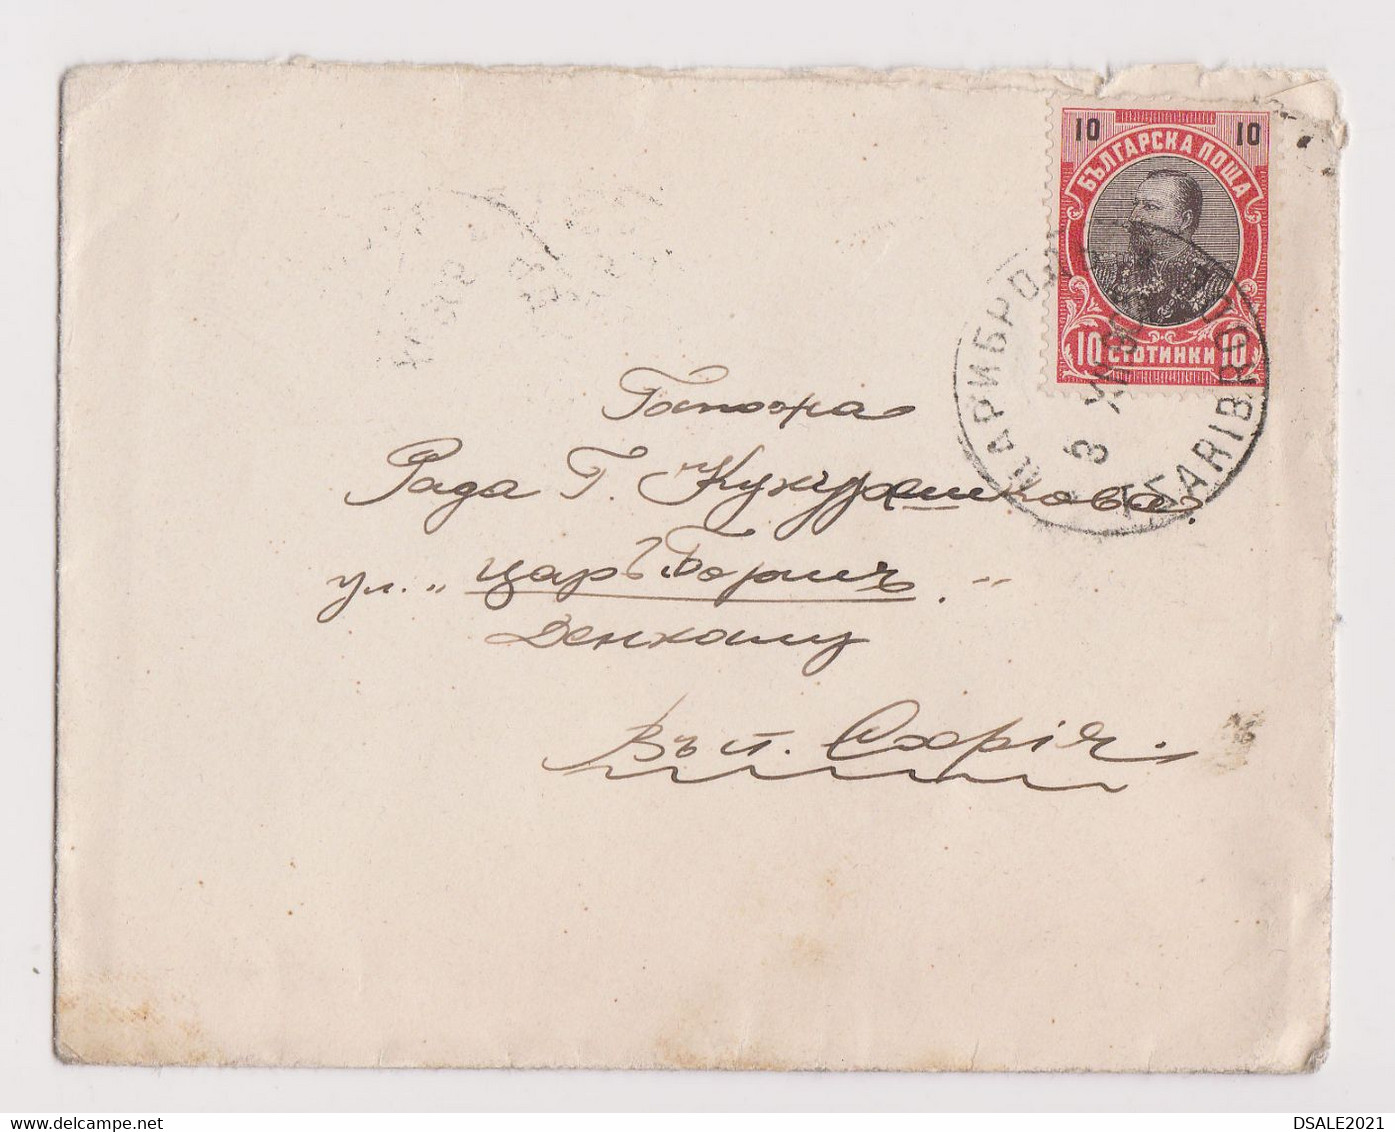 Bulgaria Bulgarie Cover 1903 W/Mi-Nr.54/10st. Ferdinand I, Definitive Stamp Rare TZARIBROD-Western Outlands Cachet Ds421 - Covers & Documents